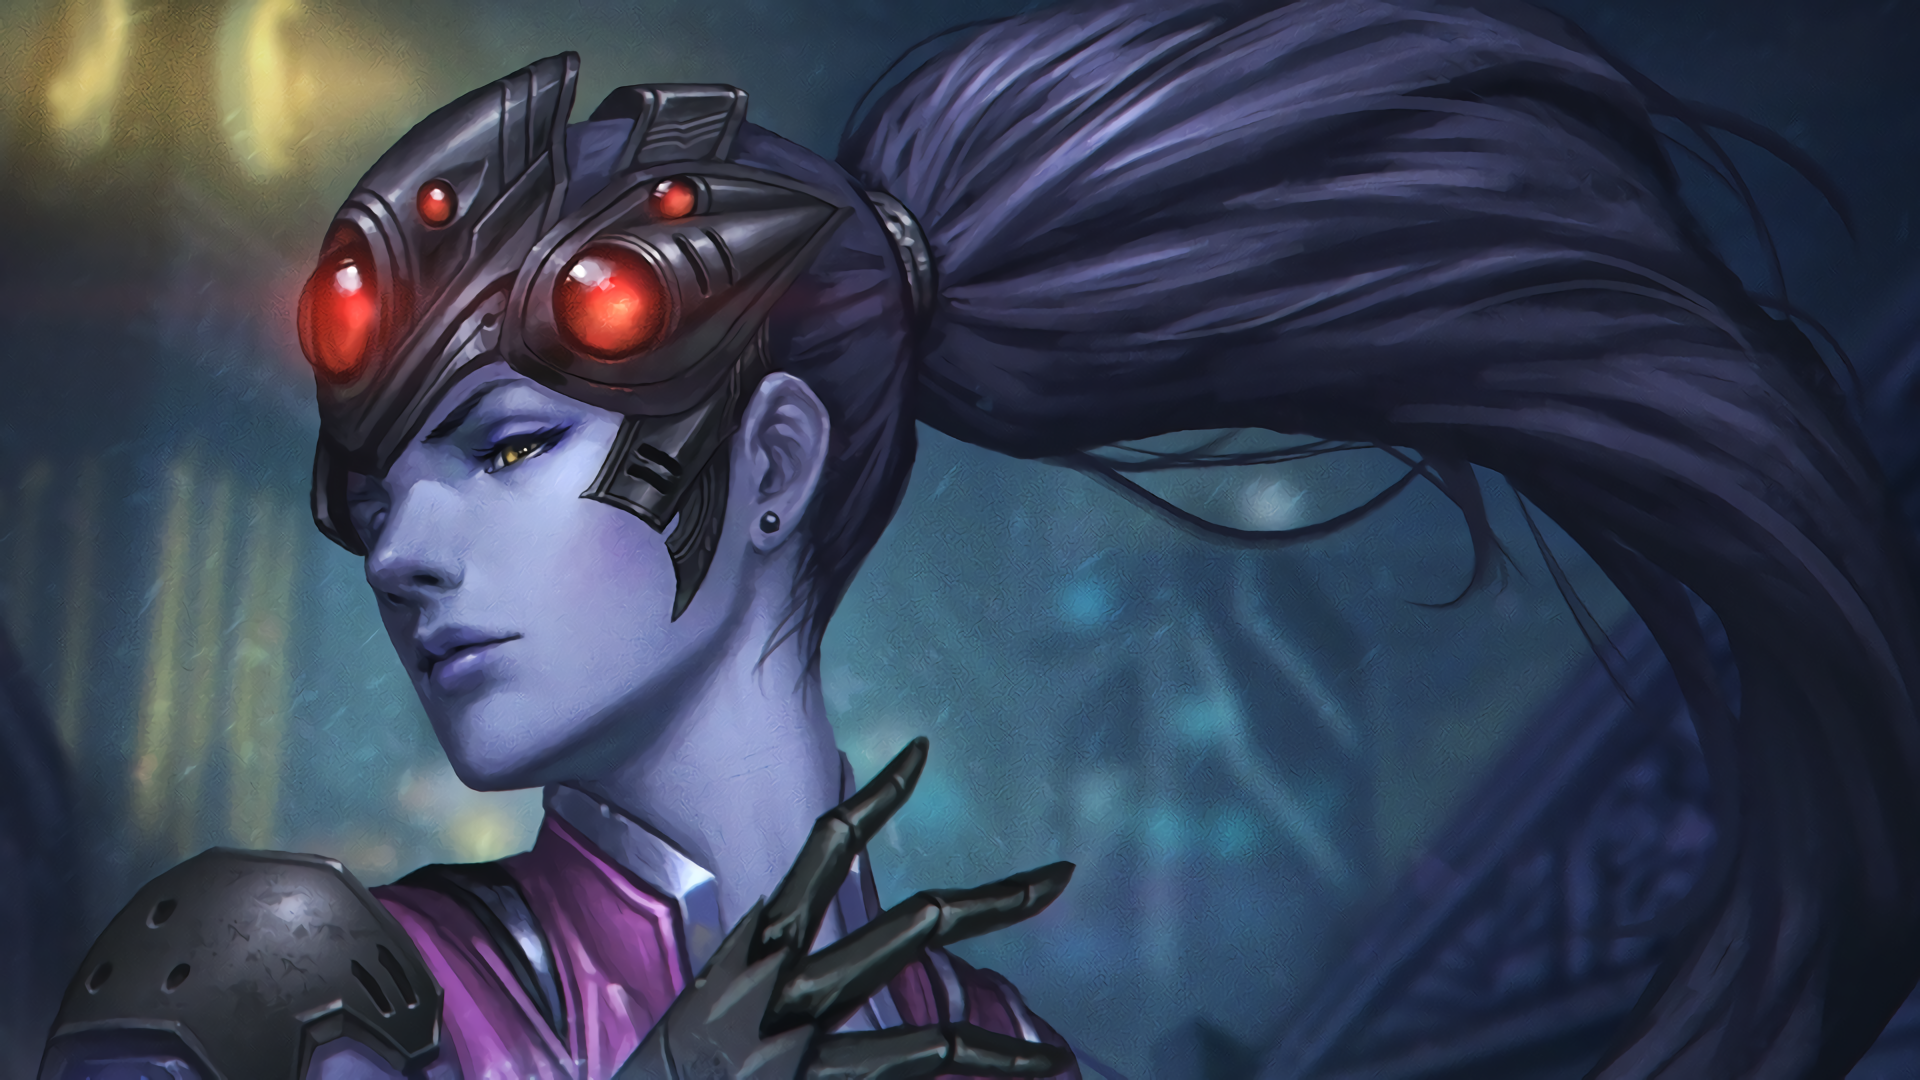 General 1920x1080 fantasy art Overwatch Affiliation: Talon Blizzard Entertainment Widowmaker (Overwatch) PC gaming video game girls video game art video game characters long hair